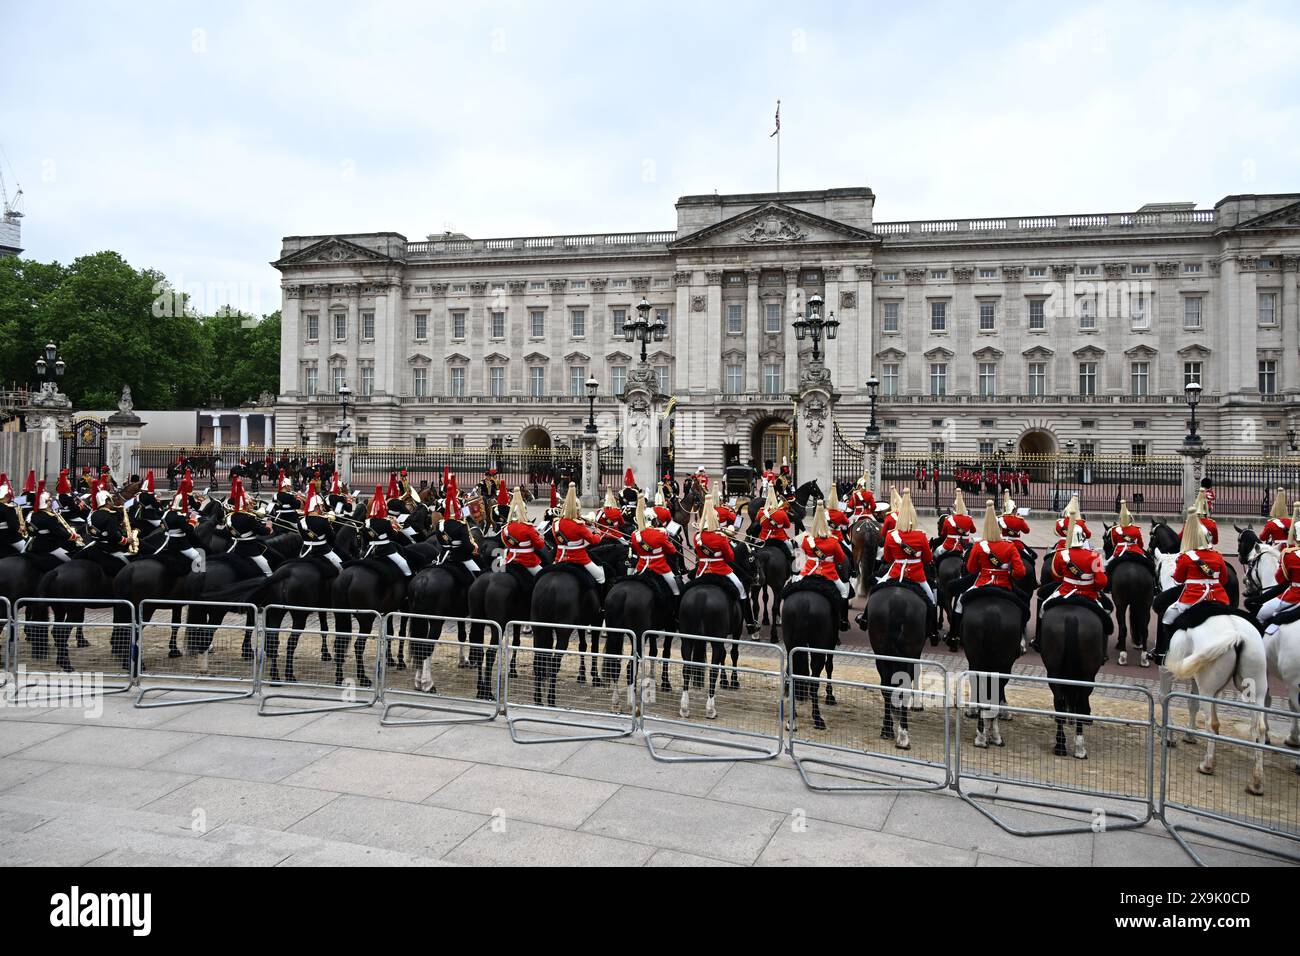 London, UK. 1st June, 2024. The Major General’s Review of the Trooping of the Colour for the King’s Birthday Parade takes place. This rehearsal is the first of two formal reviews in full dress uniform of the troops and horses before parading for HM The King’s Official Birthday Parade on the 15th June. The soldiers are inspected by Major General James Bowder OBE, The Major General Commanding the Household Division. Image: Mounted Household Cavalry line up outside Buckingham Palace as the King’s carriage arrives back from the Trooping of the Colour ceremony at Horse Guards Parade. Credit: Malcol Stock Photo